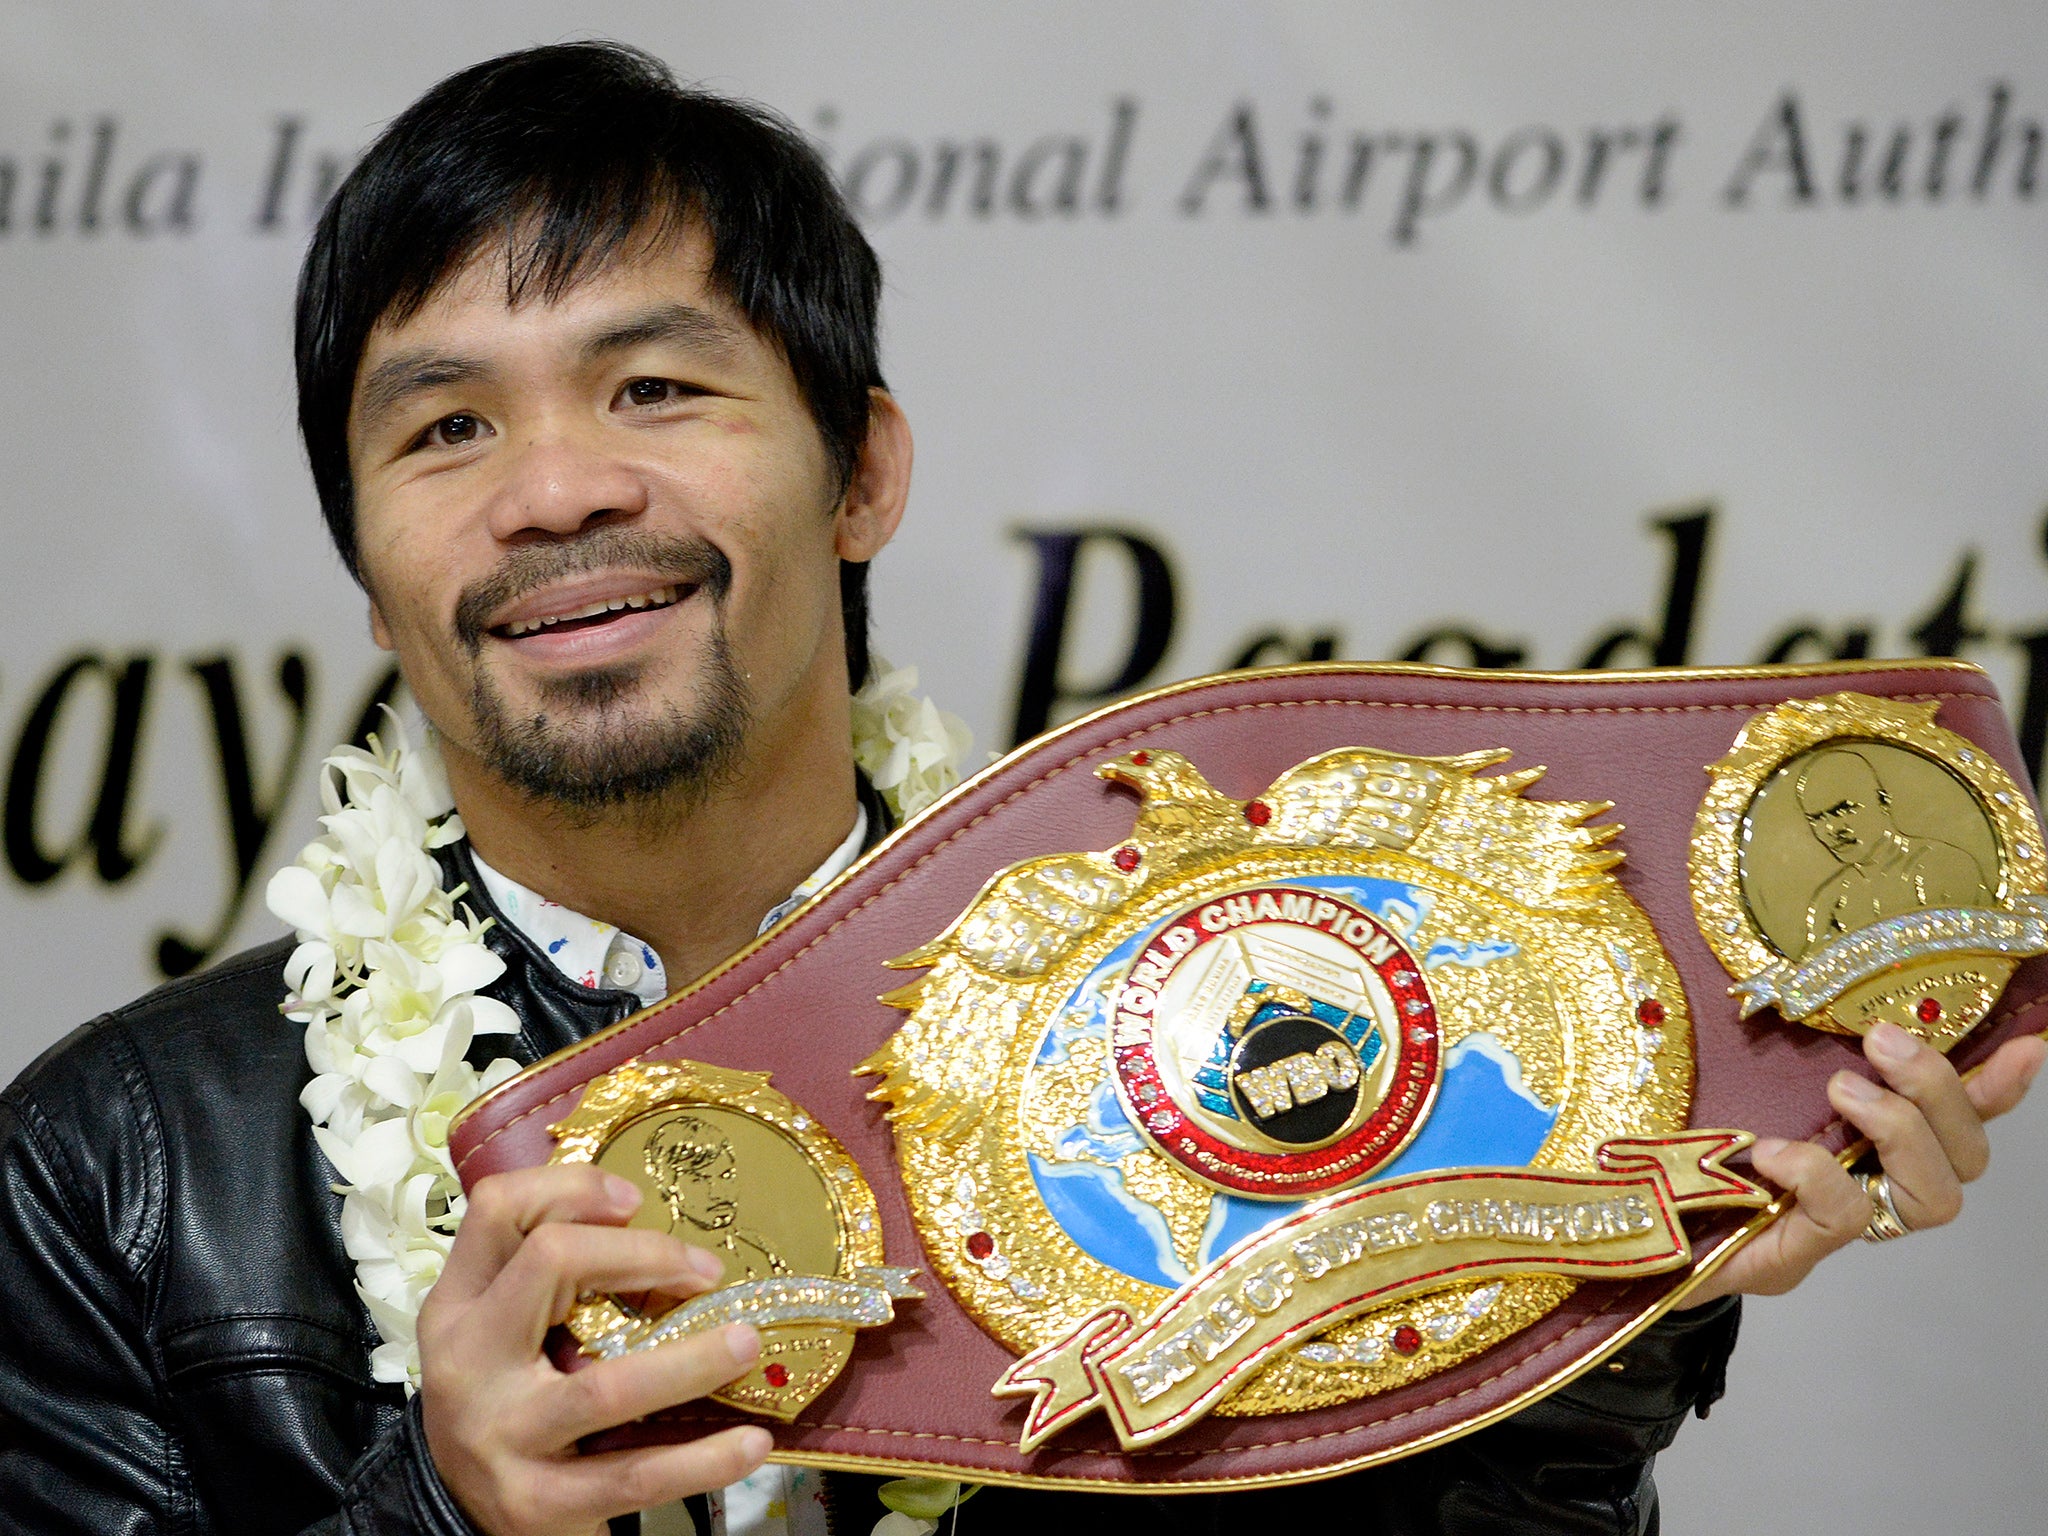 Militant group Abu Sayyaf allegedly plotted to kidnap Pacquiao and one of his children